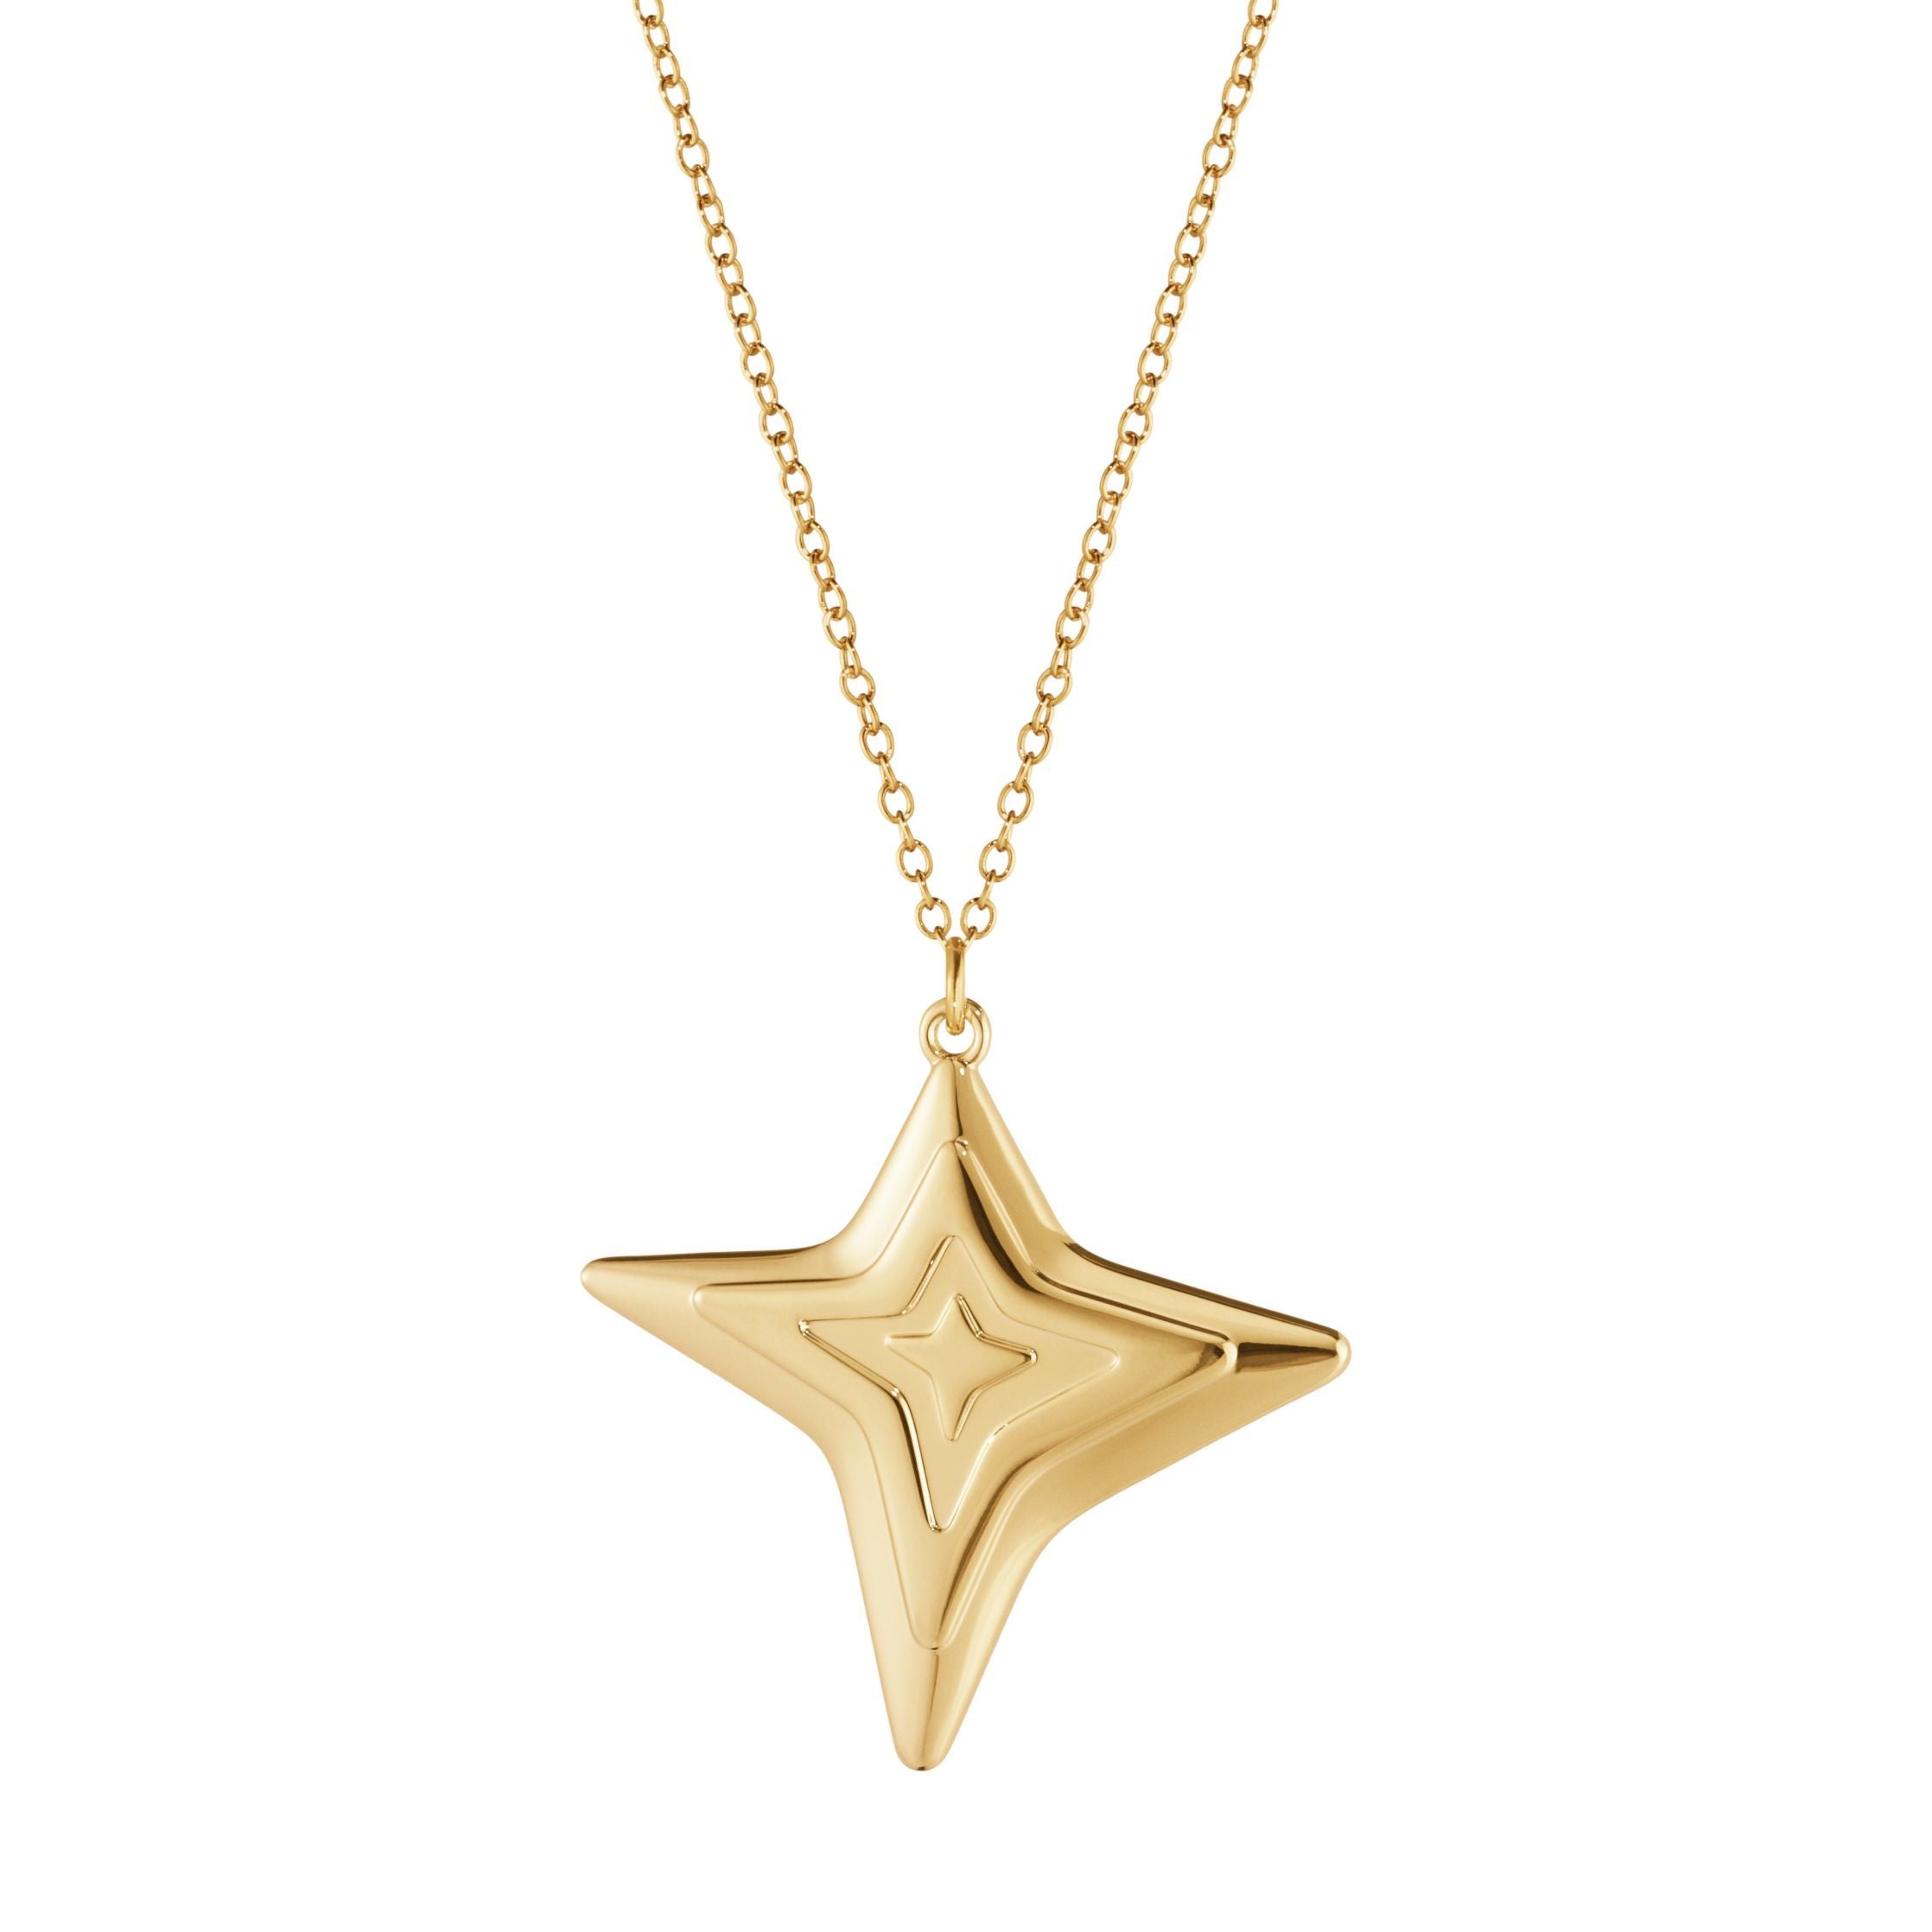 Georg Jensen Ornament Four Timied Star, Gilded